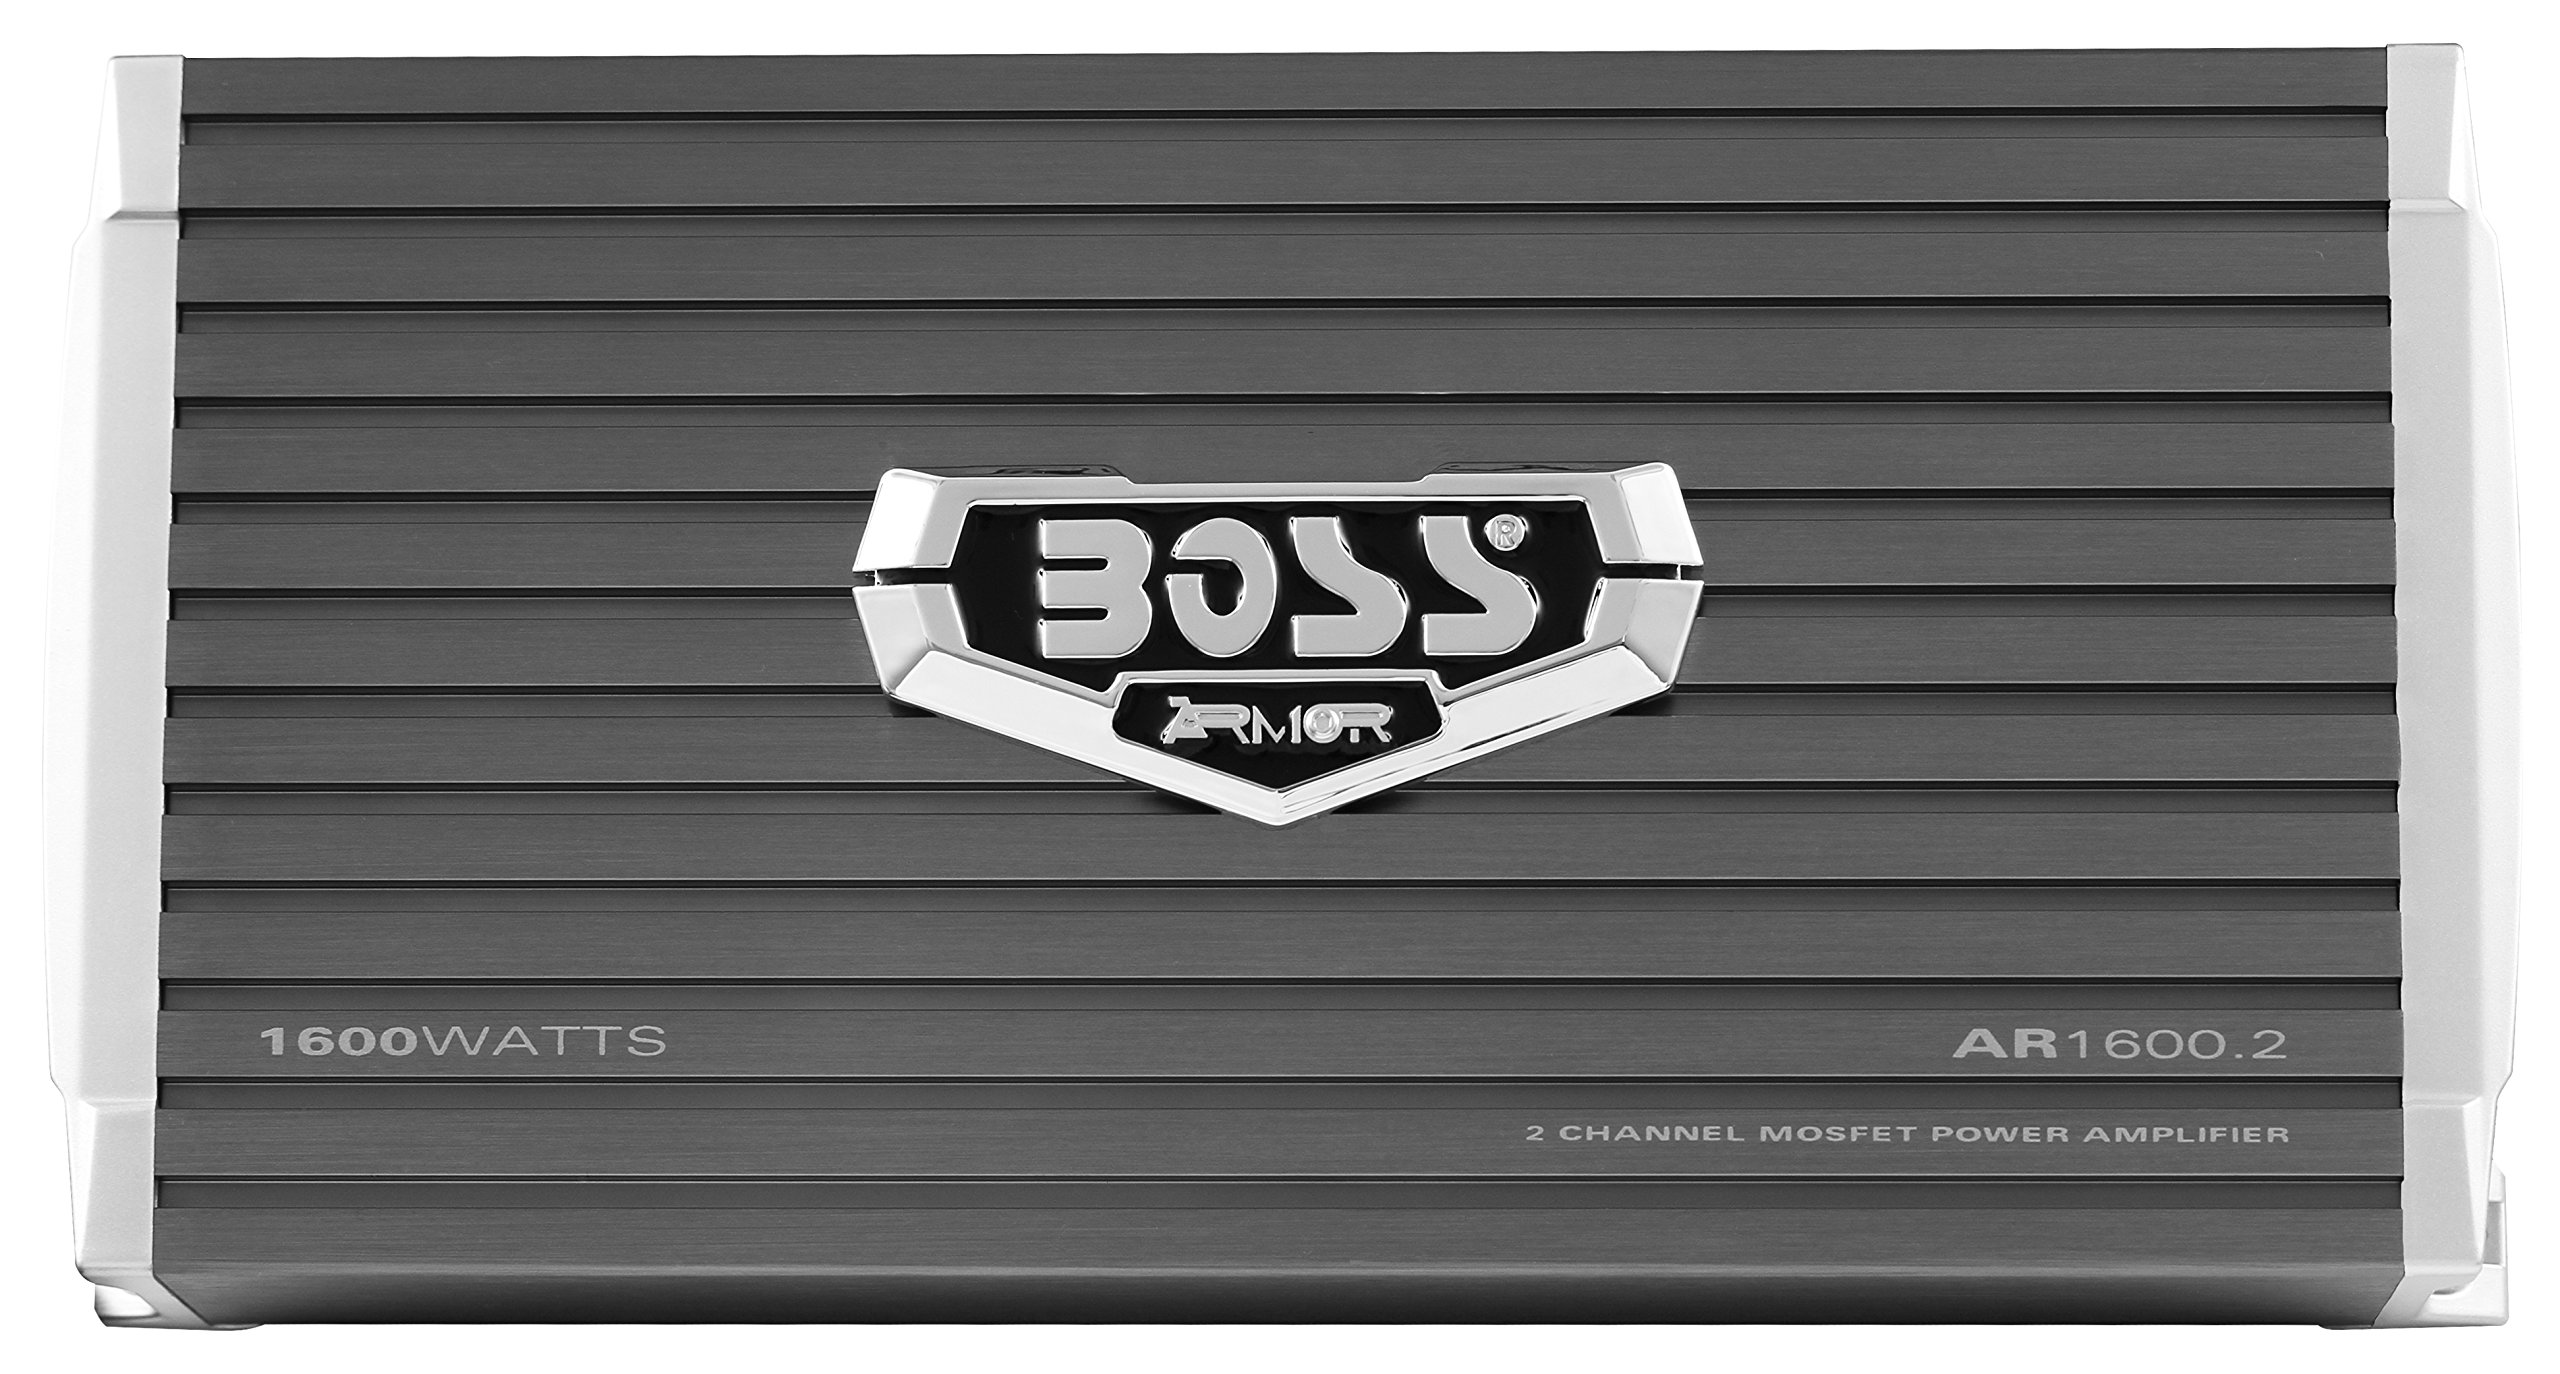 BOSS Audio Systems AR1600.2 2 Channel Car Amplifier - 1600 Watts, Full Range, Class AB, 2-4 Ohm Stable, Mosfet Power Supply, Bridgeable